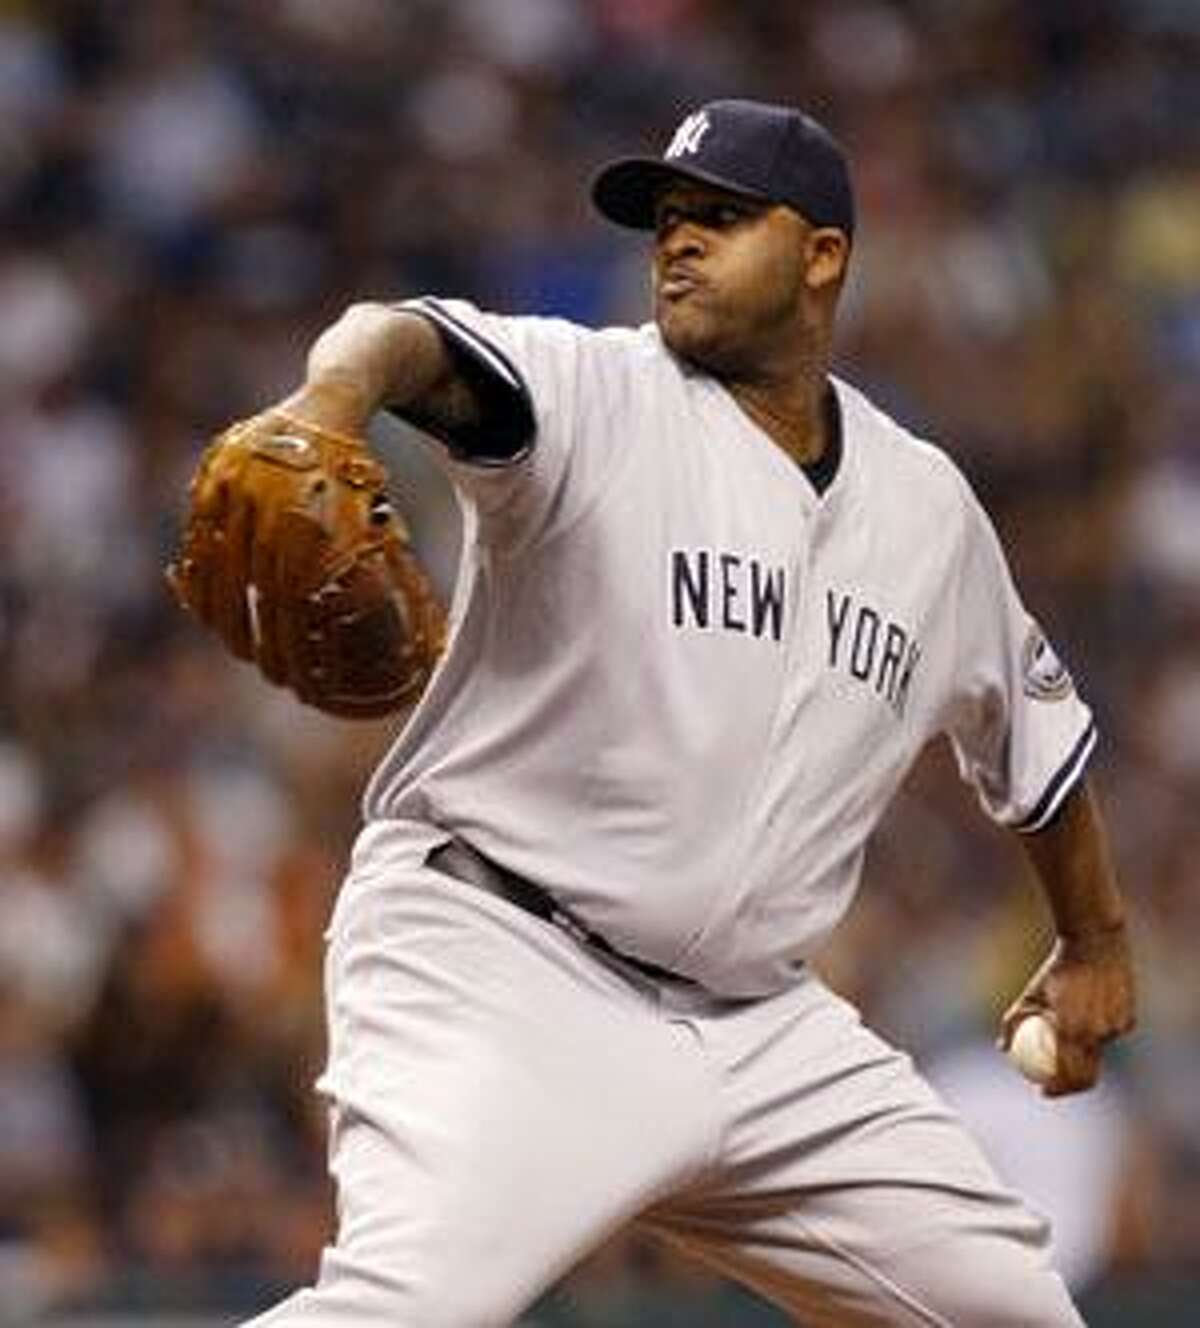 New York Yankees starting pitcher CC Sabathia throws during the second inning against the Tampa Bay Rays Tuesday in St. Petersburg, Fla.